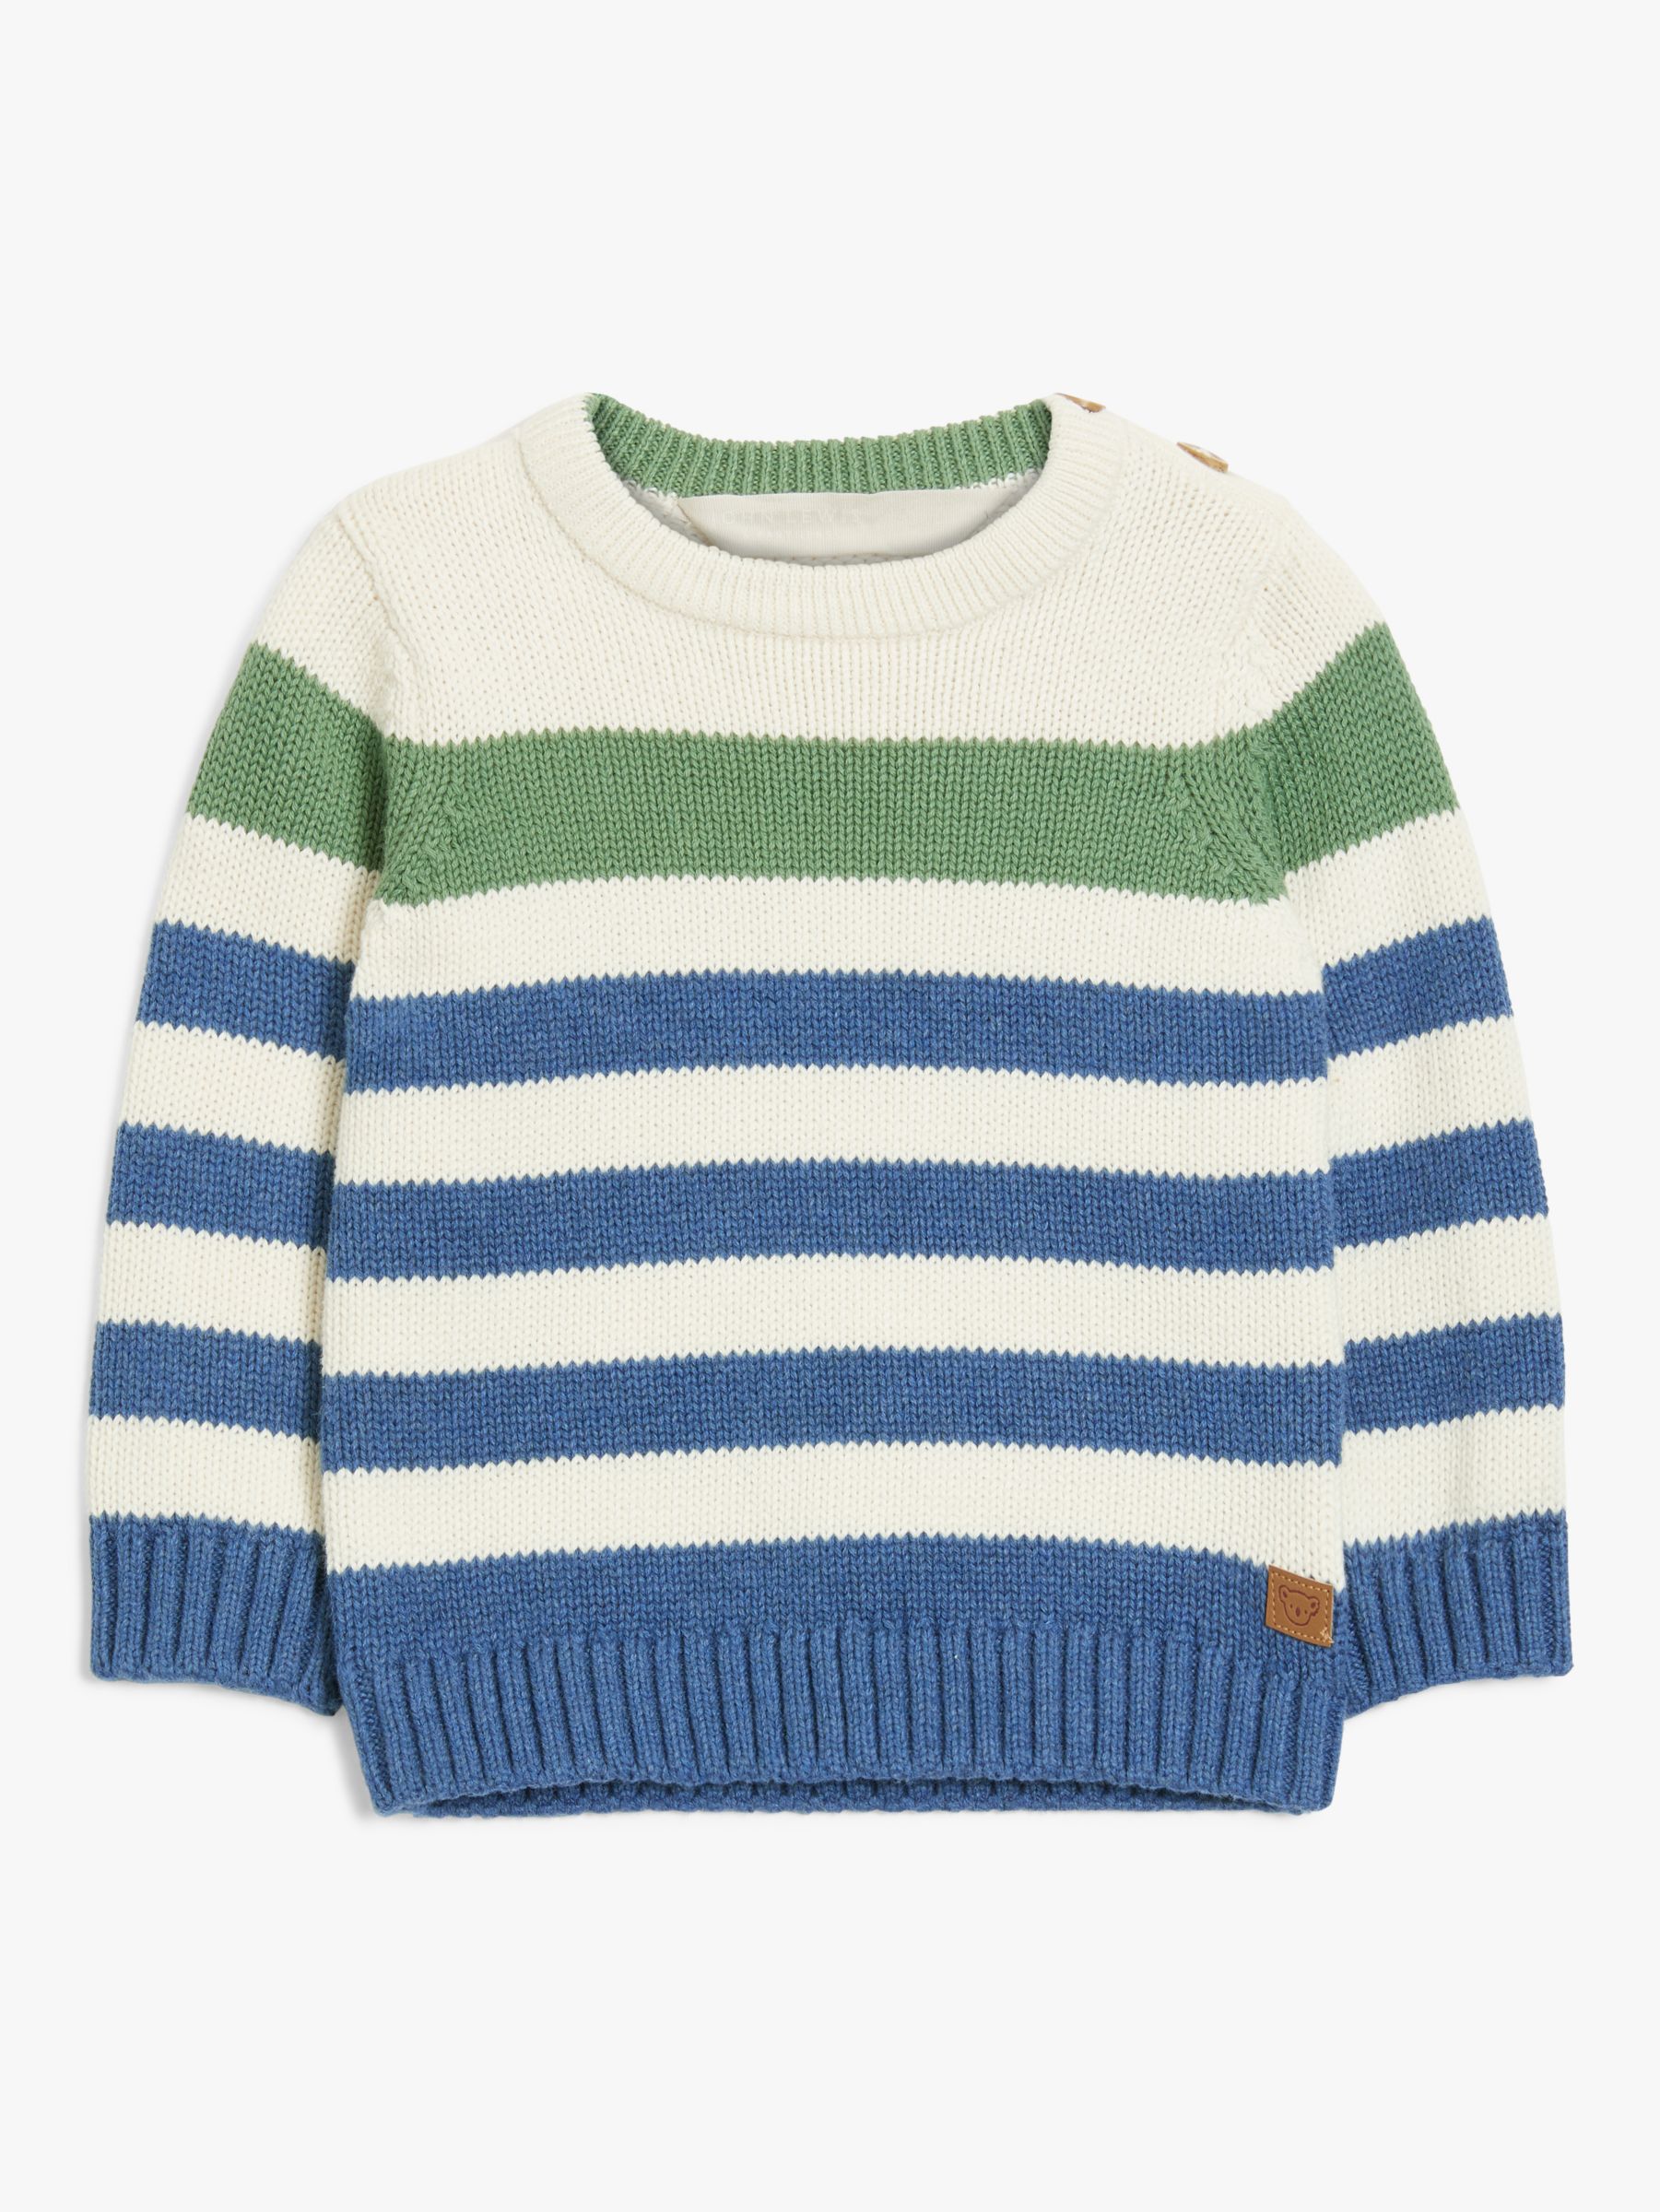 Baby Boy Clothes | Baby Boy Outfits | John Lewis & Partners